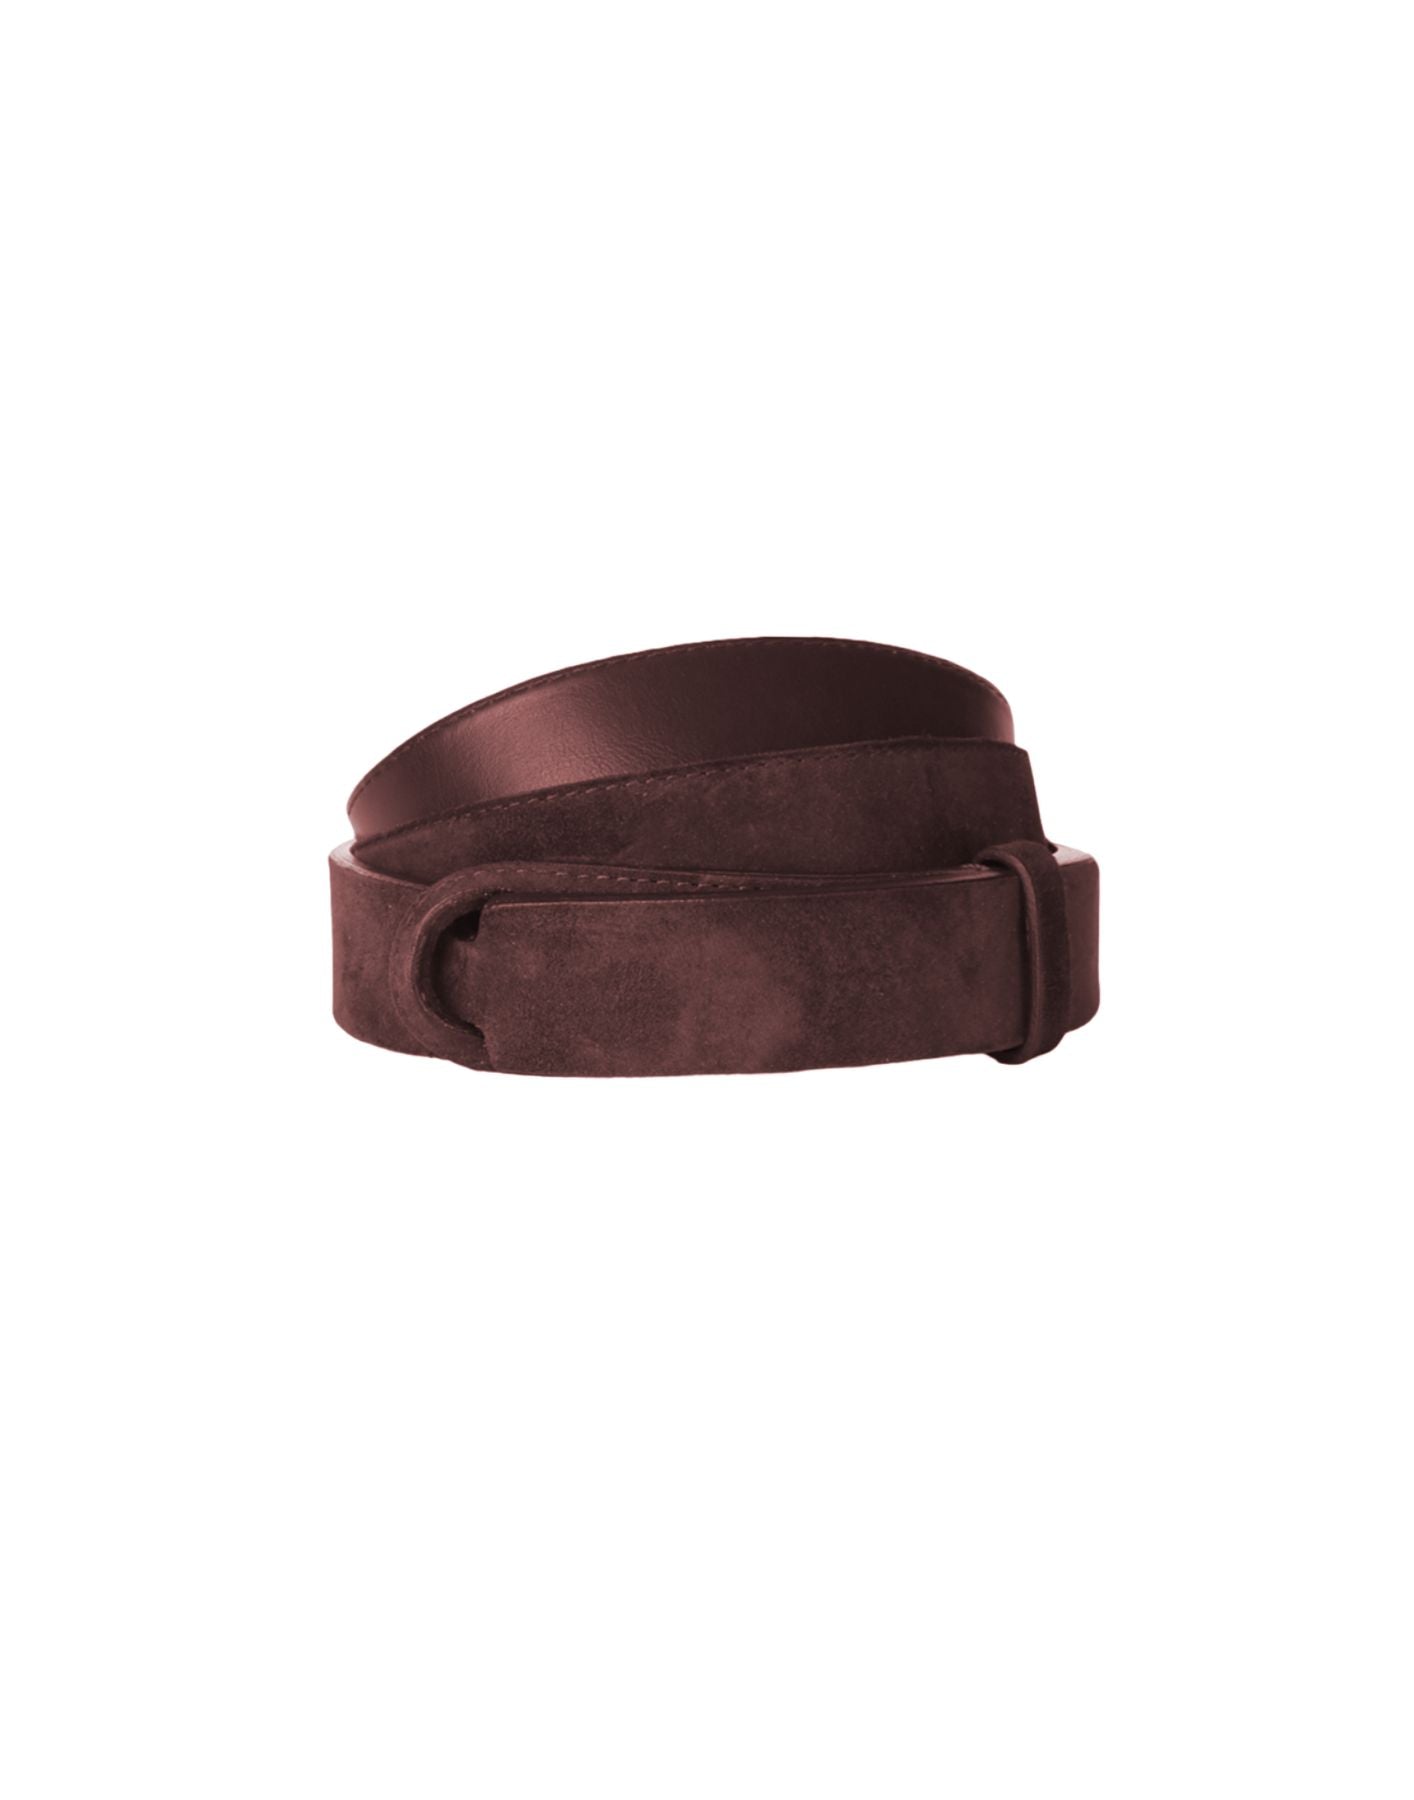 Belt for man NB0053 CLOUDY BRUCIATO ORCIANI